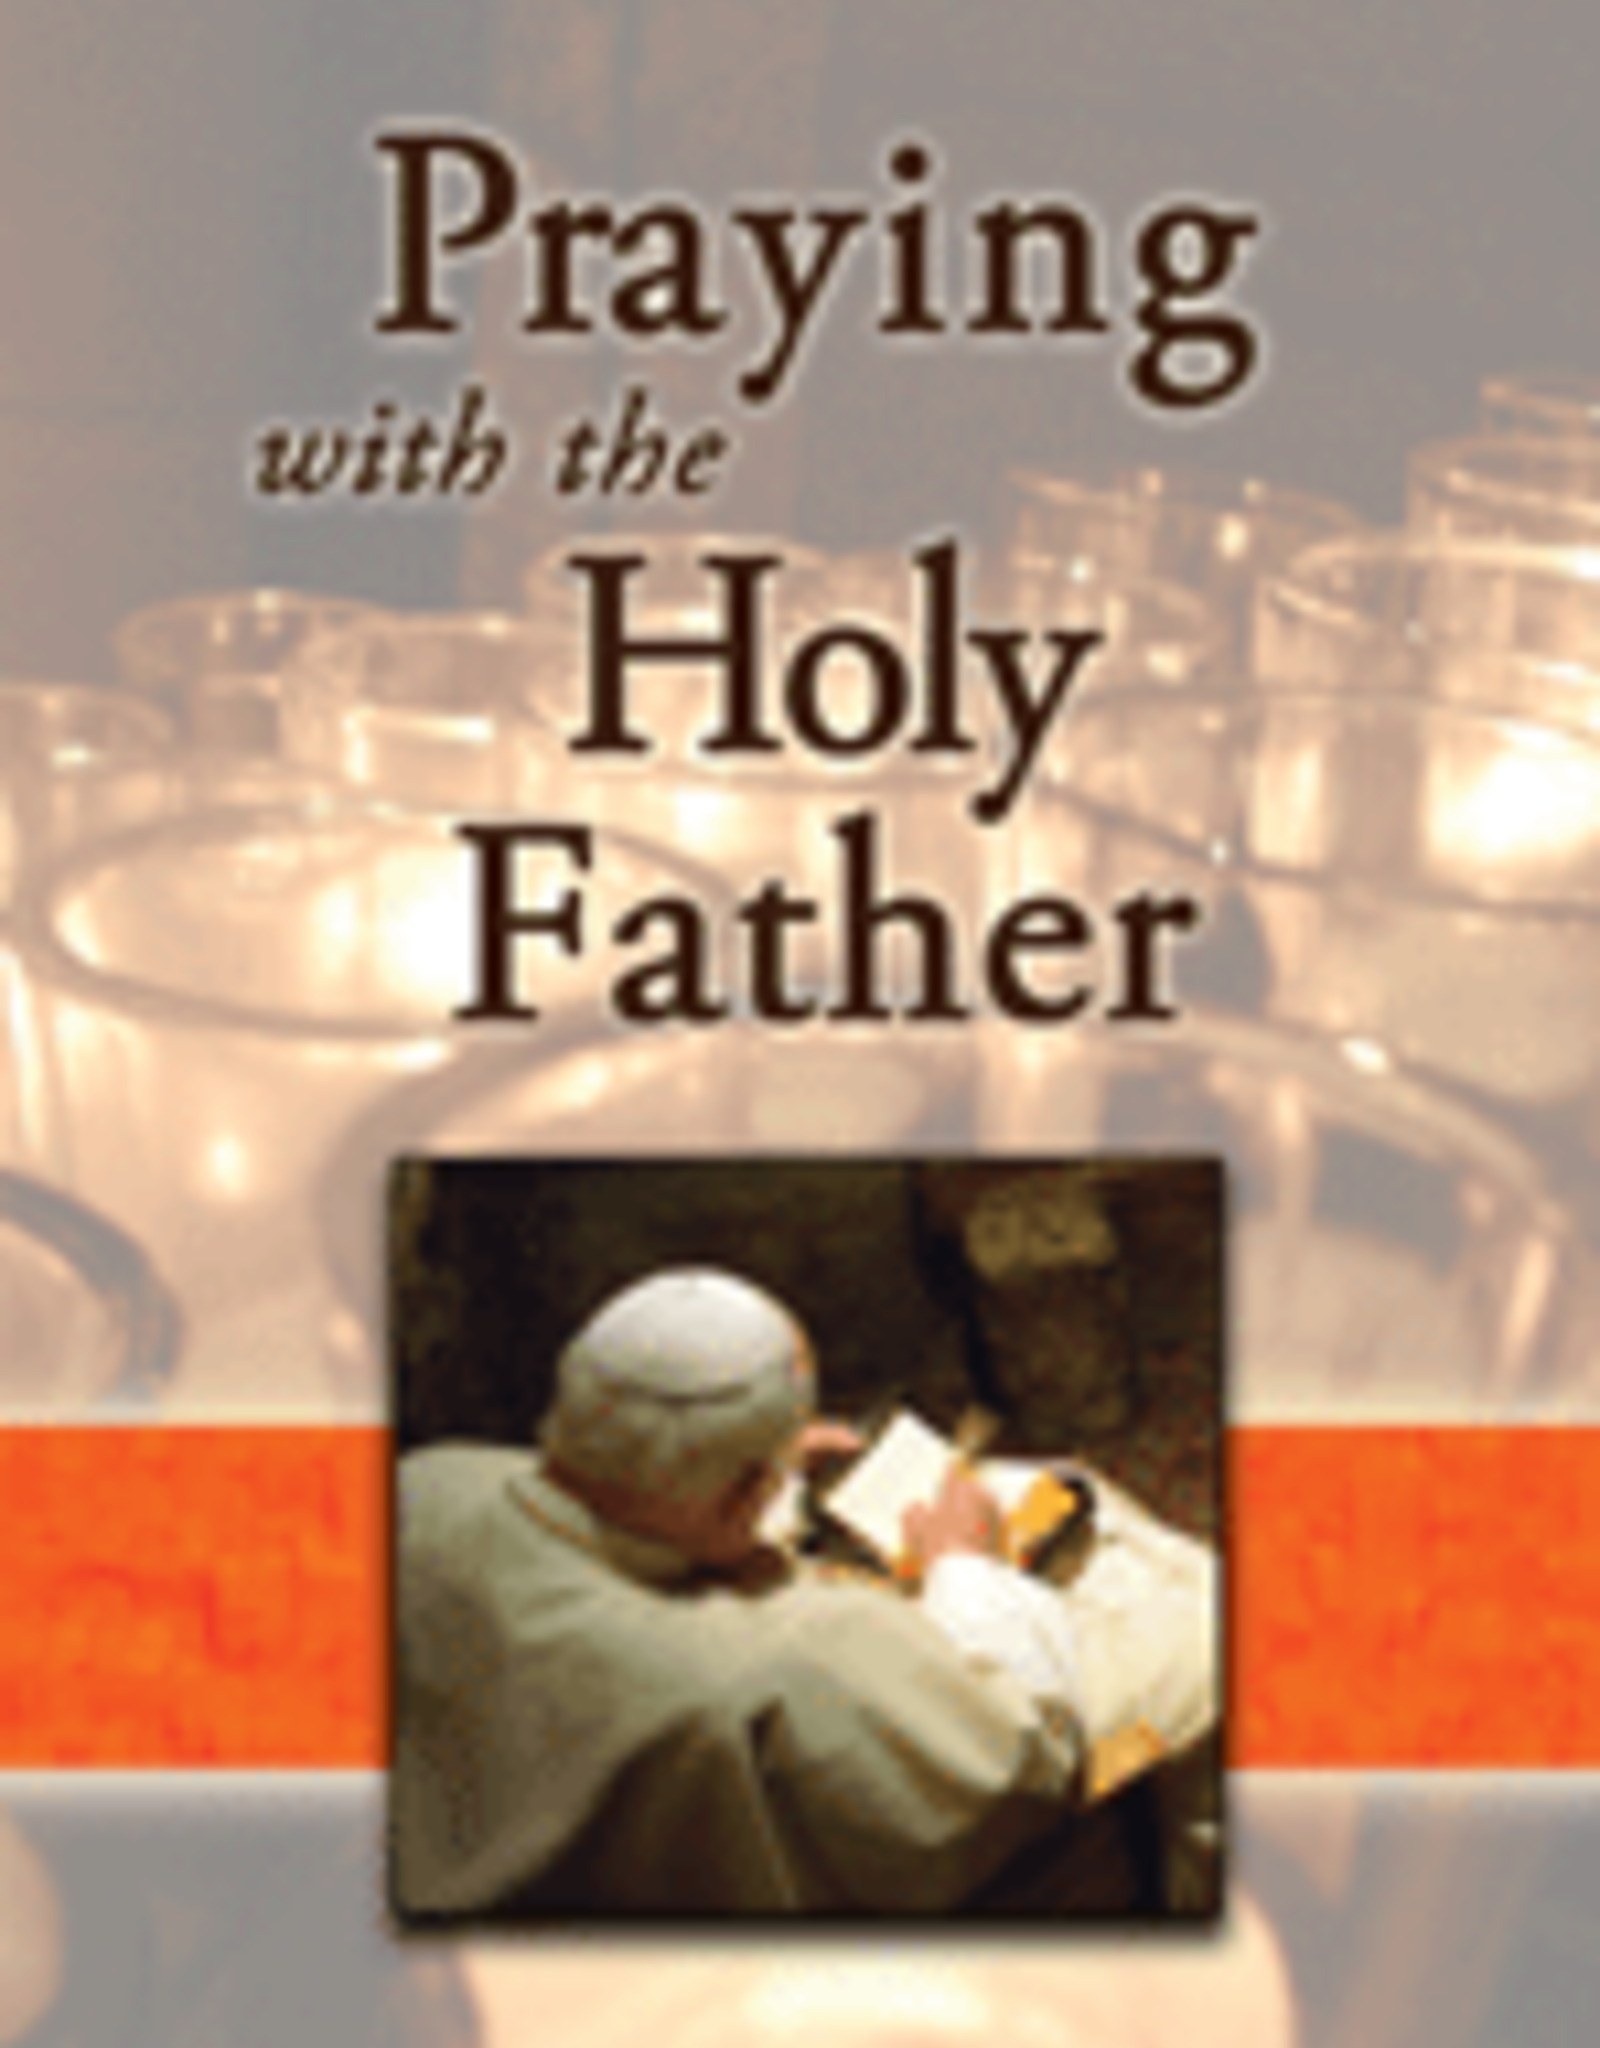 Pauline Praying with the Holy Father (paperback)